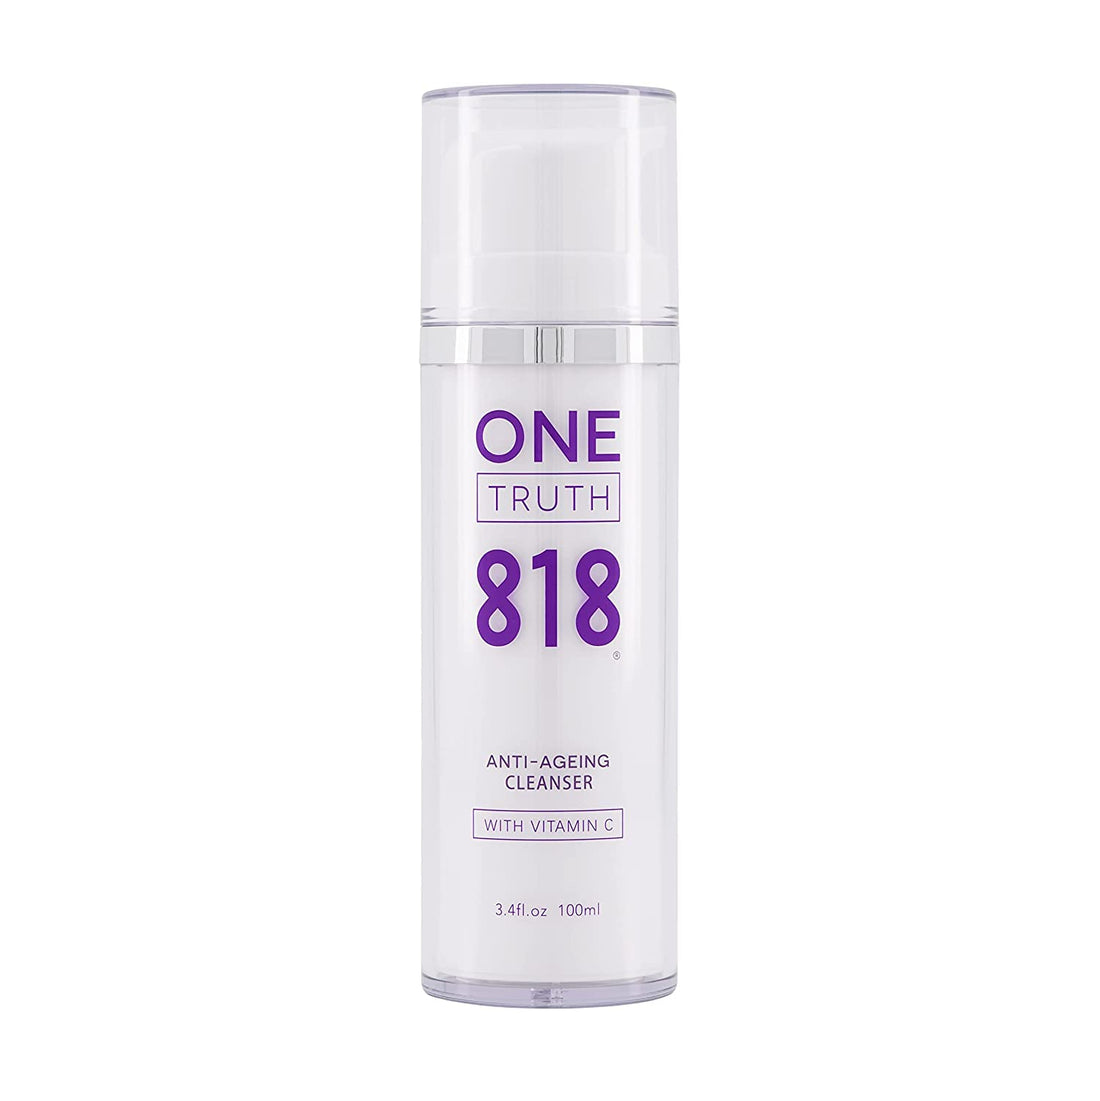 One Truth 818 Anti-Aging Cleanser - Brightening Organic Face Wash